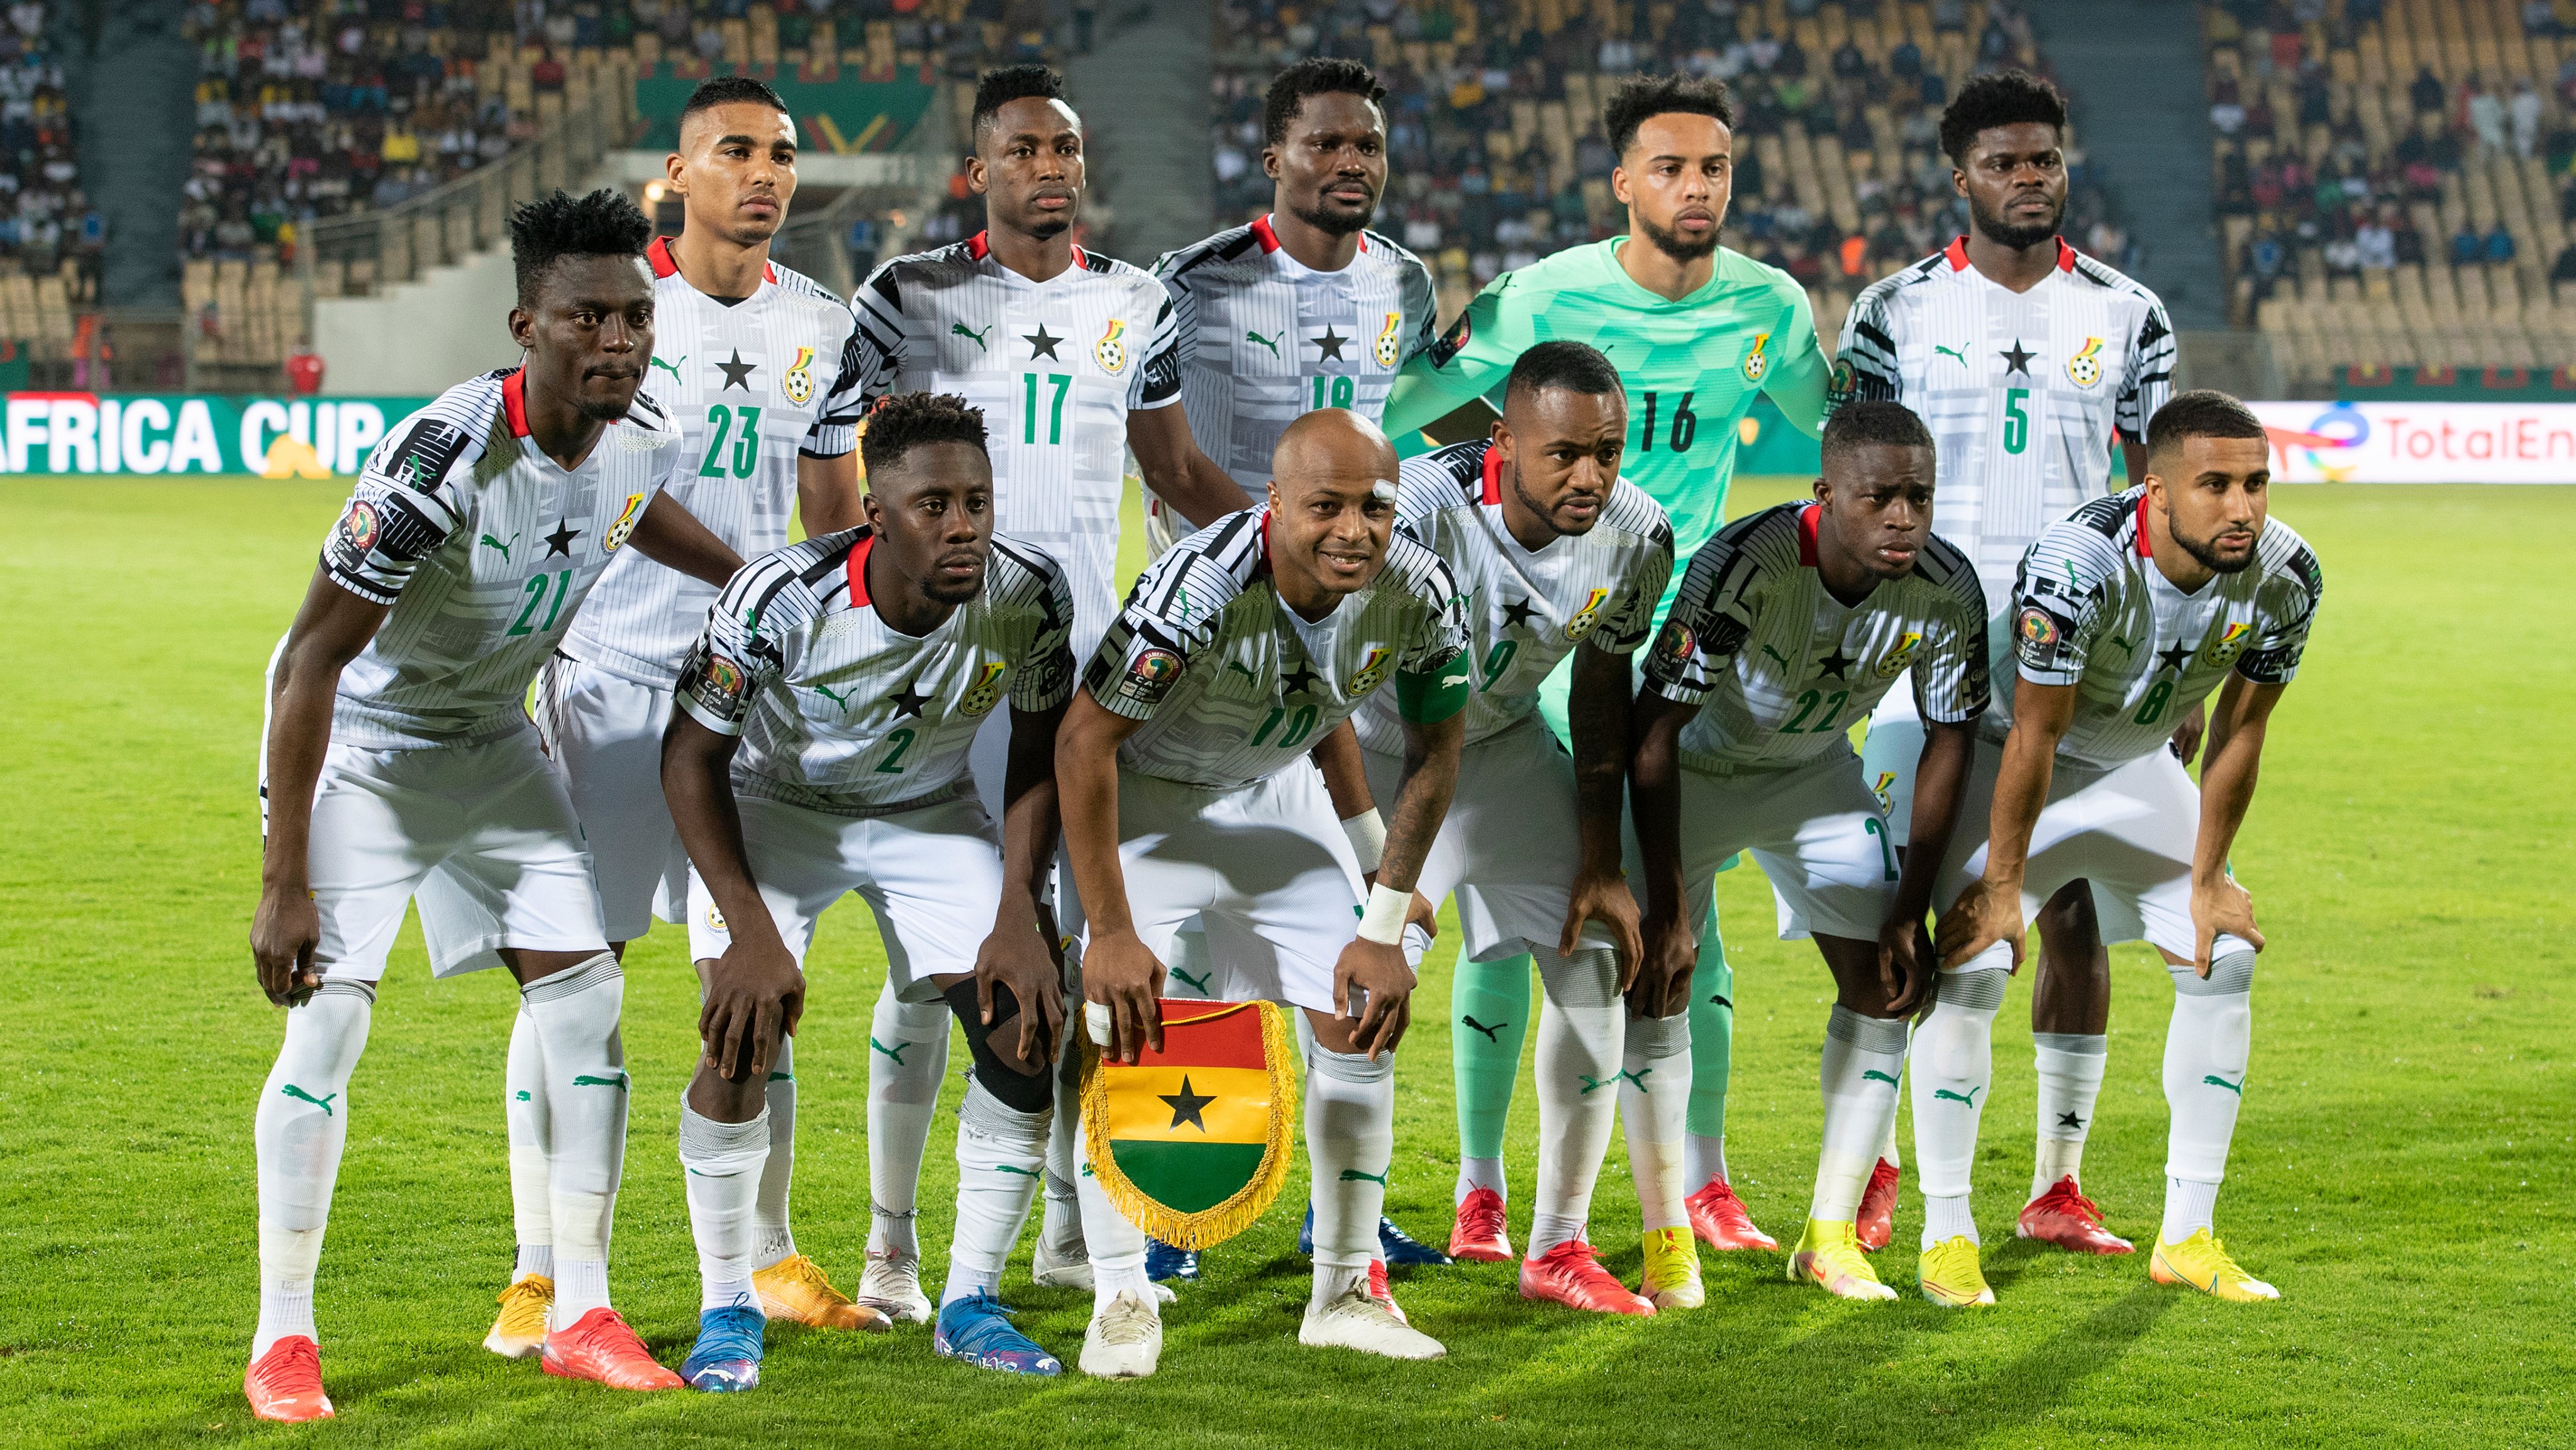 Gabon vs.  Ghana - Group C: Africa Cup of Nations 2021